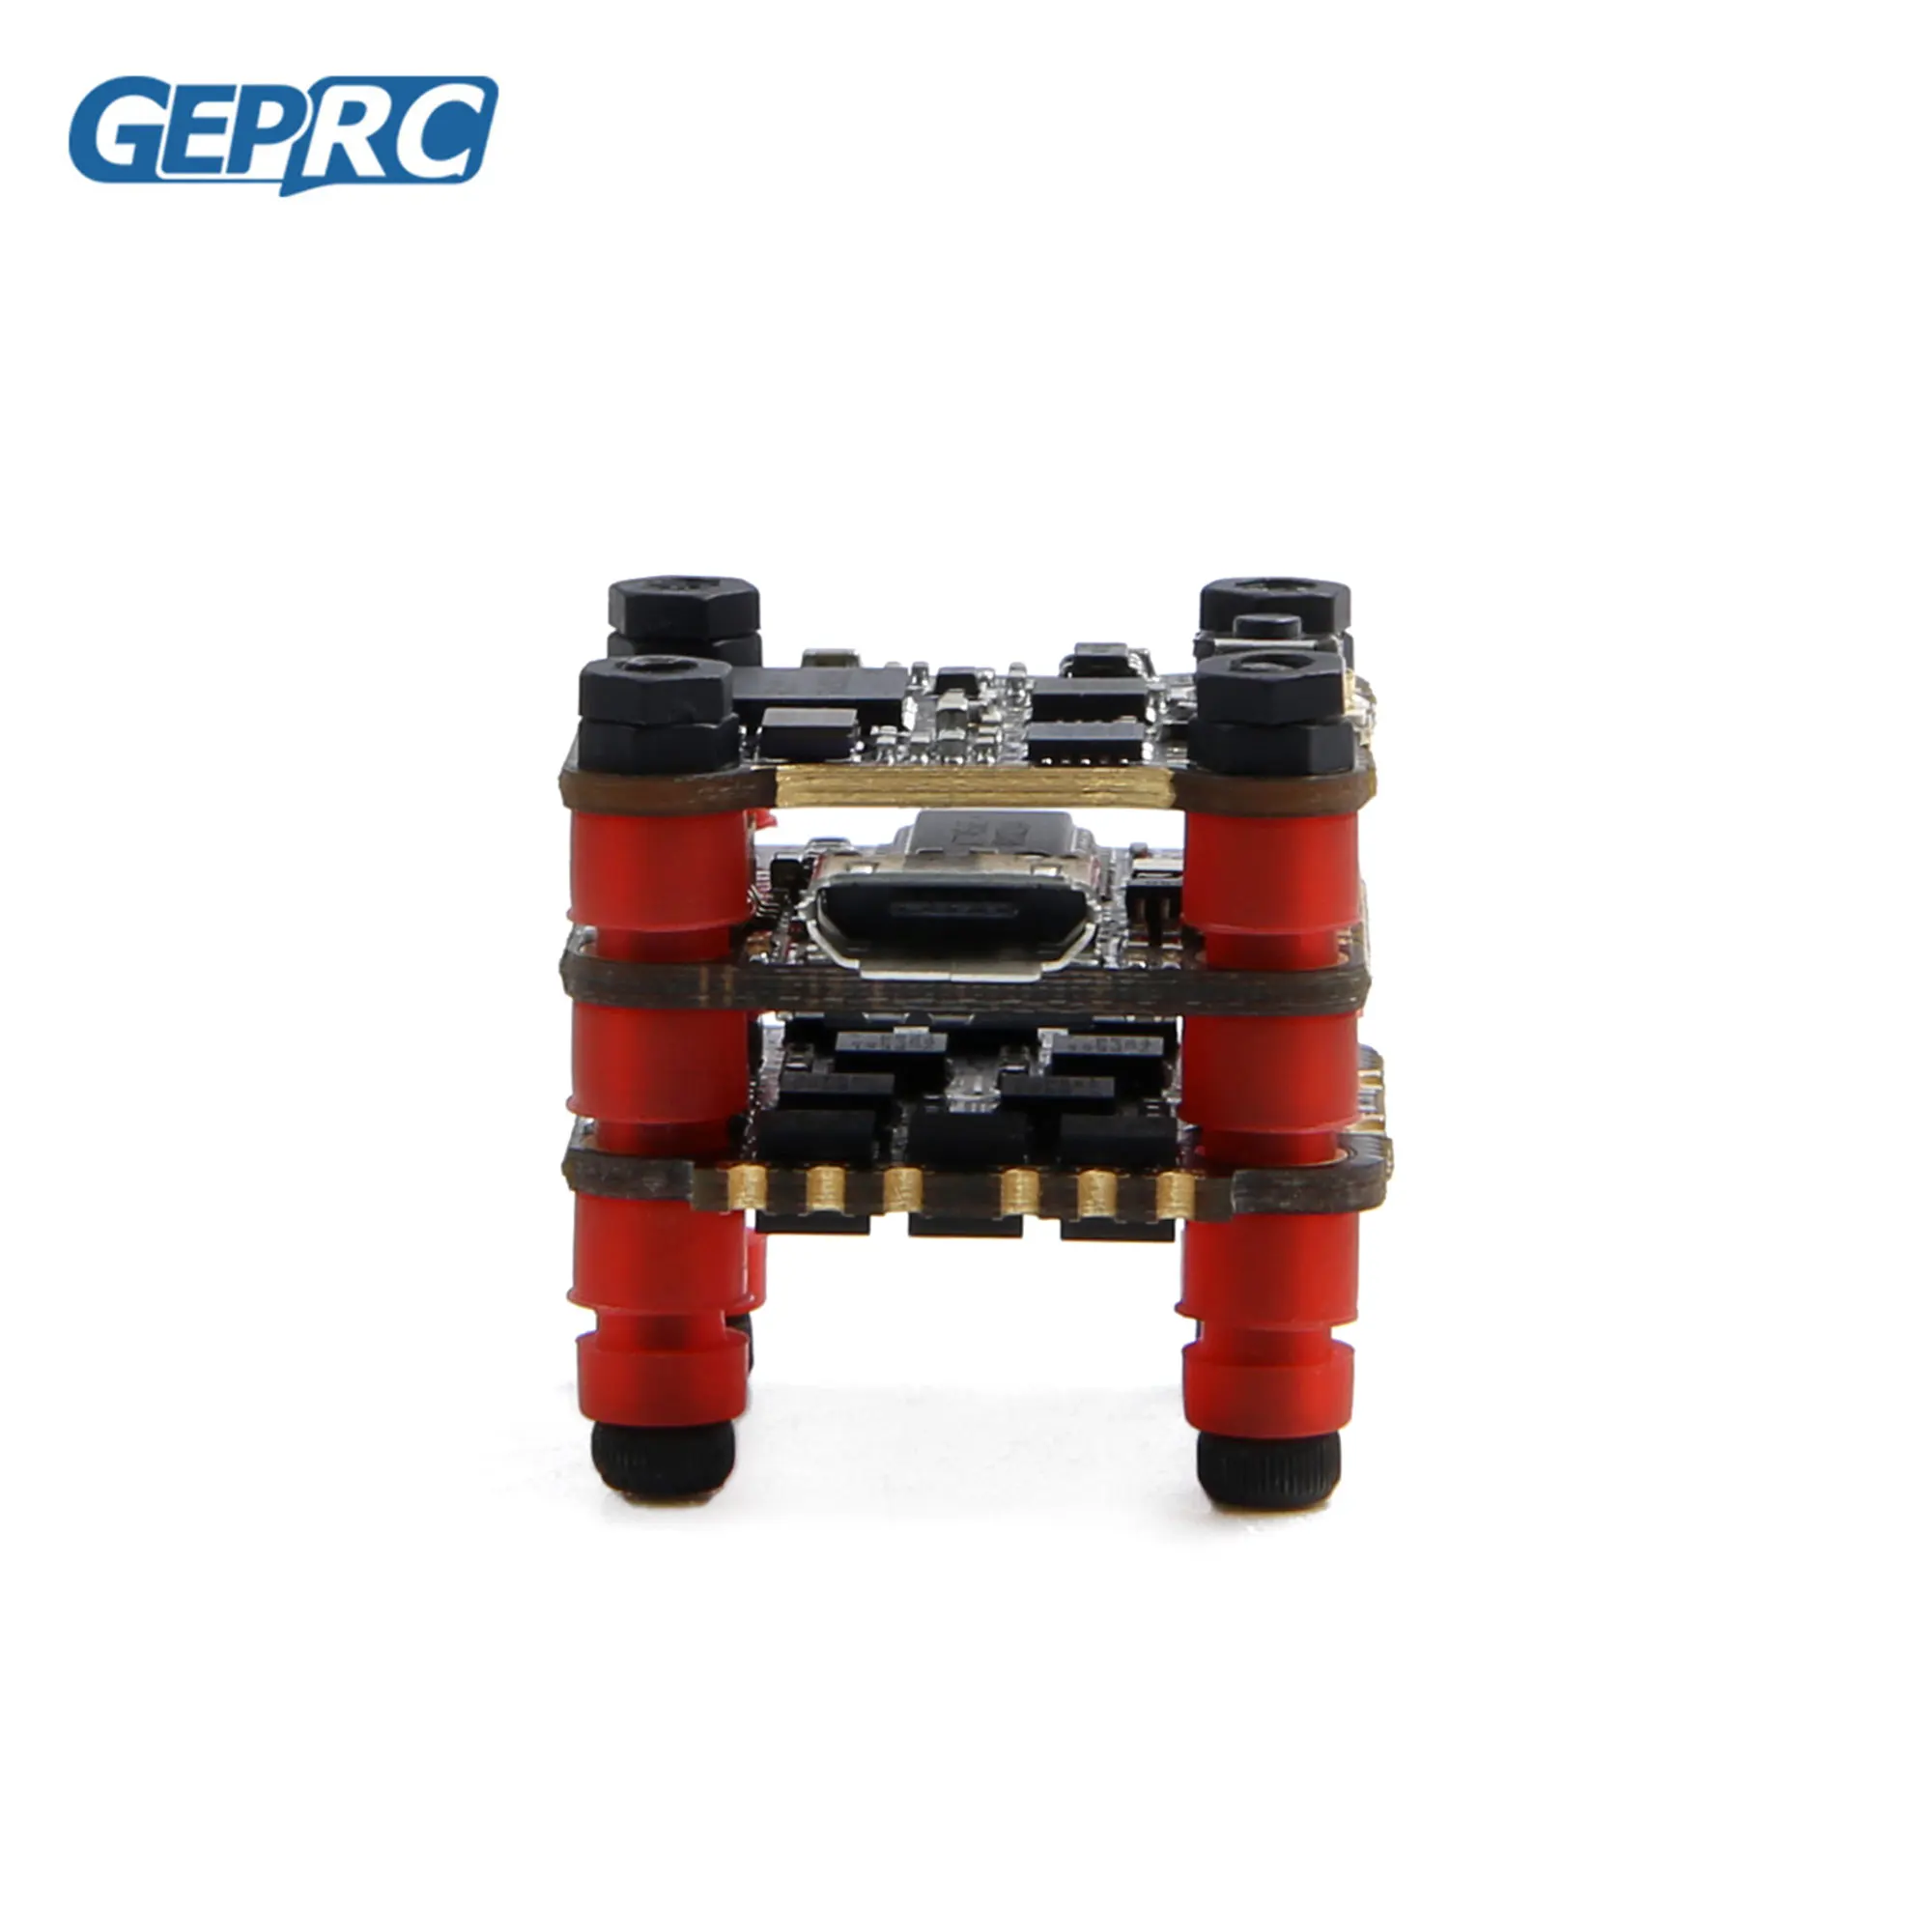 

GEPRC STABLE F411 2-4S 16X16mm Stack F411 Flight Controller BLHELIS 12A 4in1 ESC 5.8G 200mW VTX for FPV Micro Drones